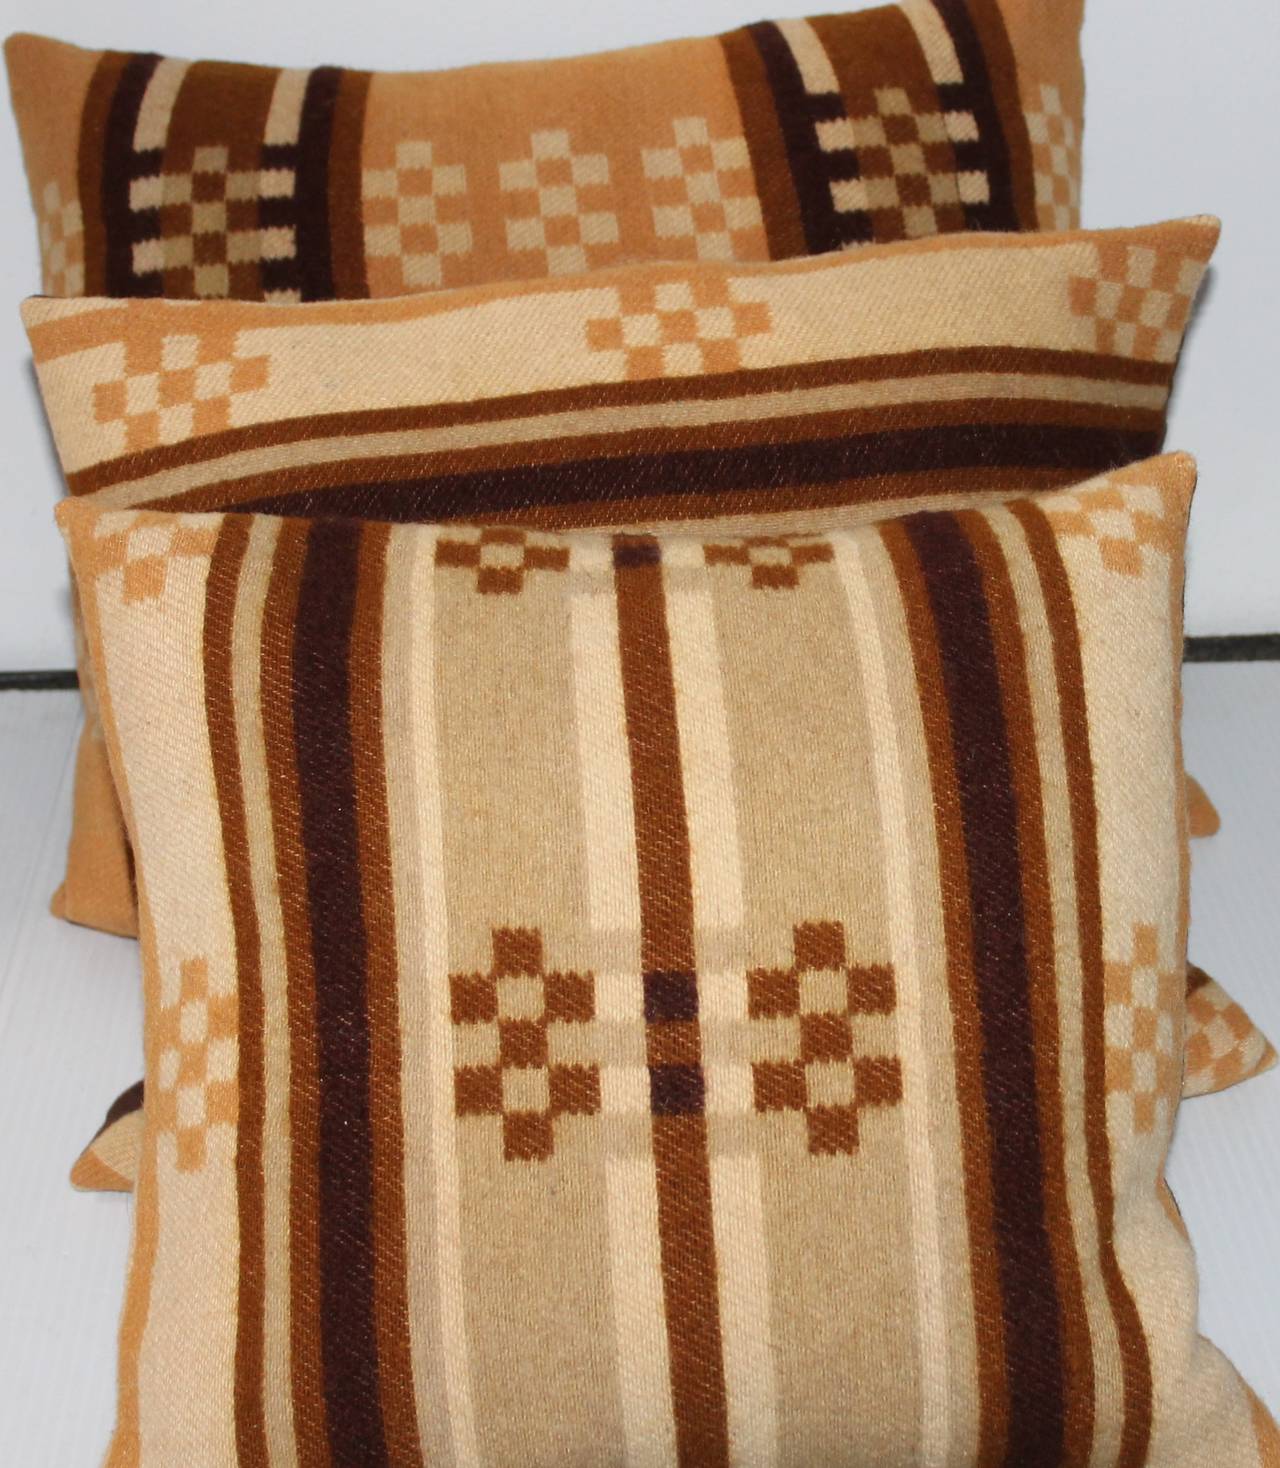 Hand-Woven Group of Four Horse Blanket Pillows